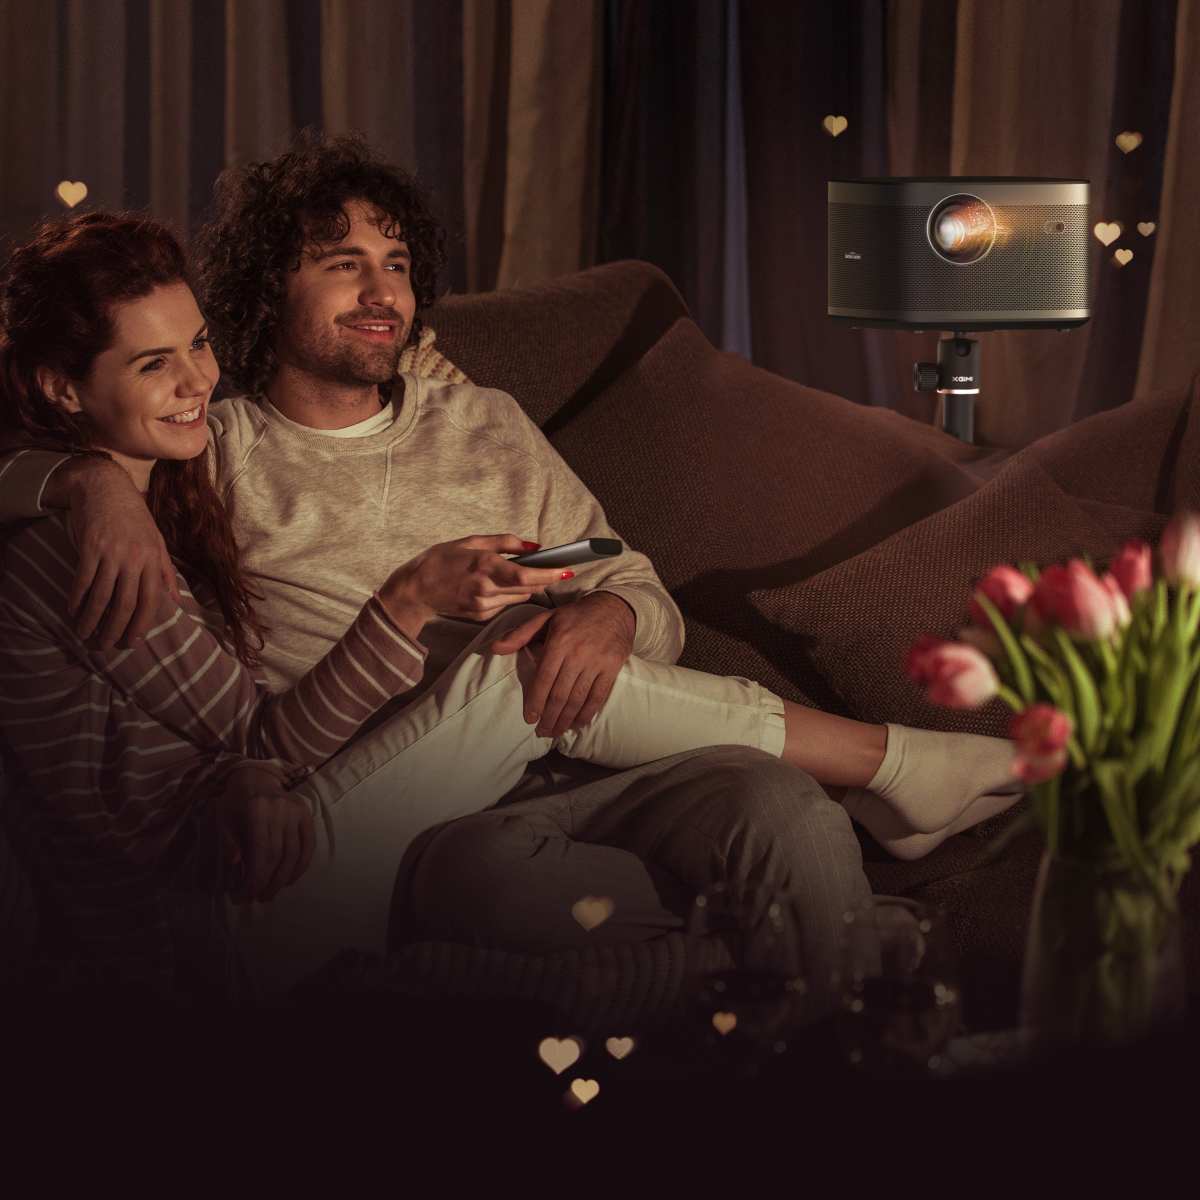 Creating Unforgettable Valentine's Day Memories With Smart Projectors